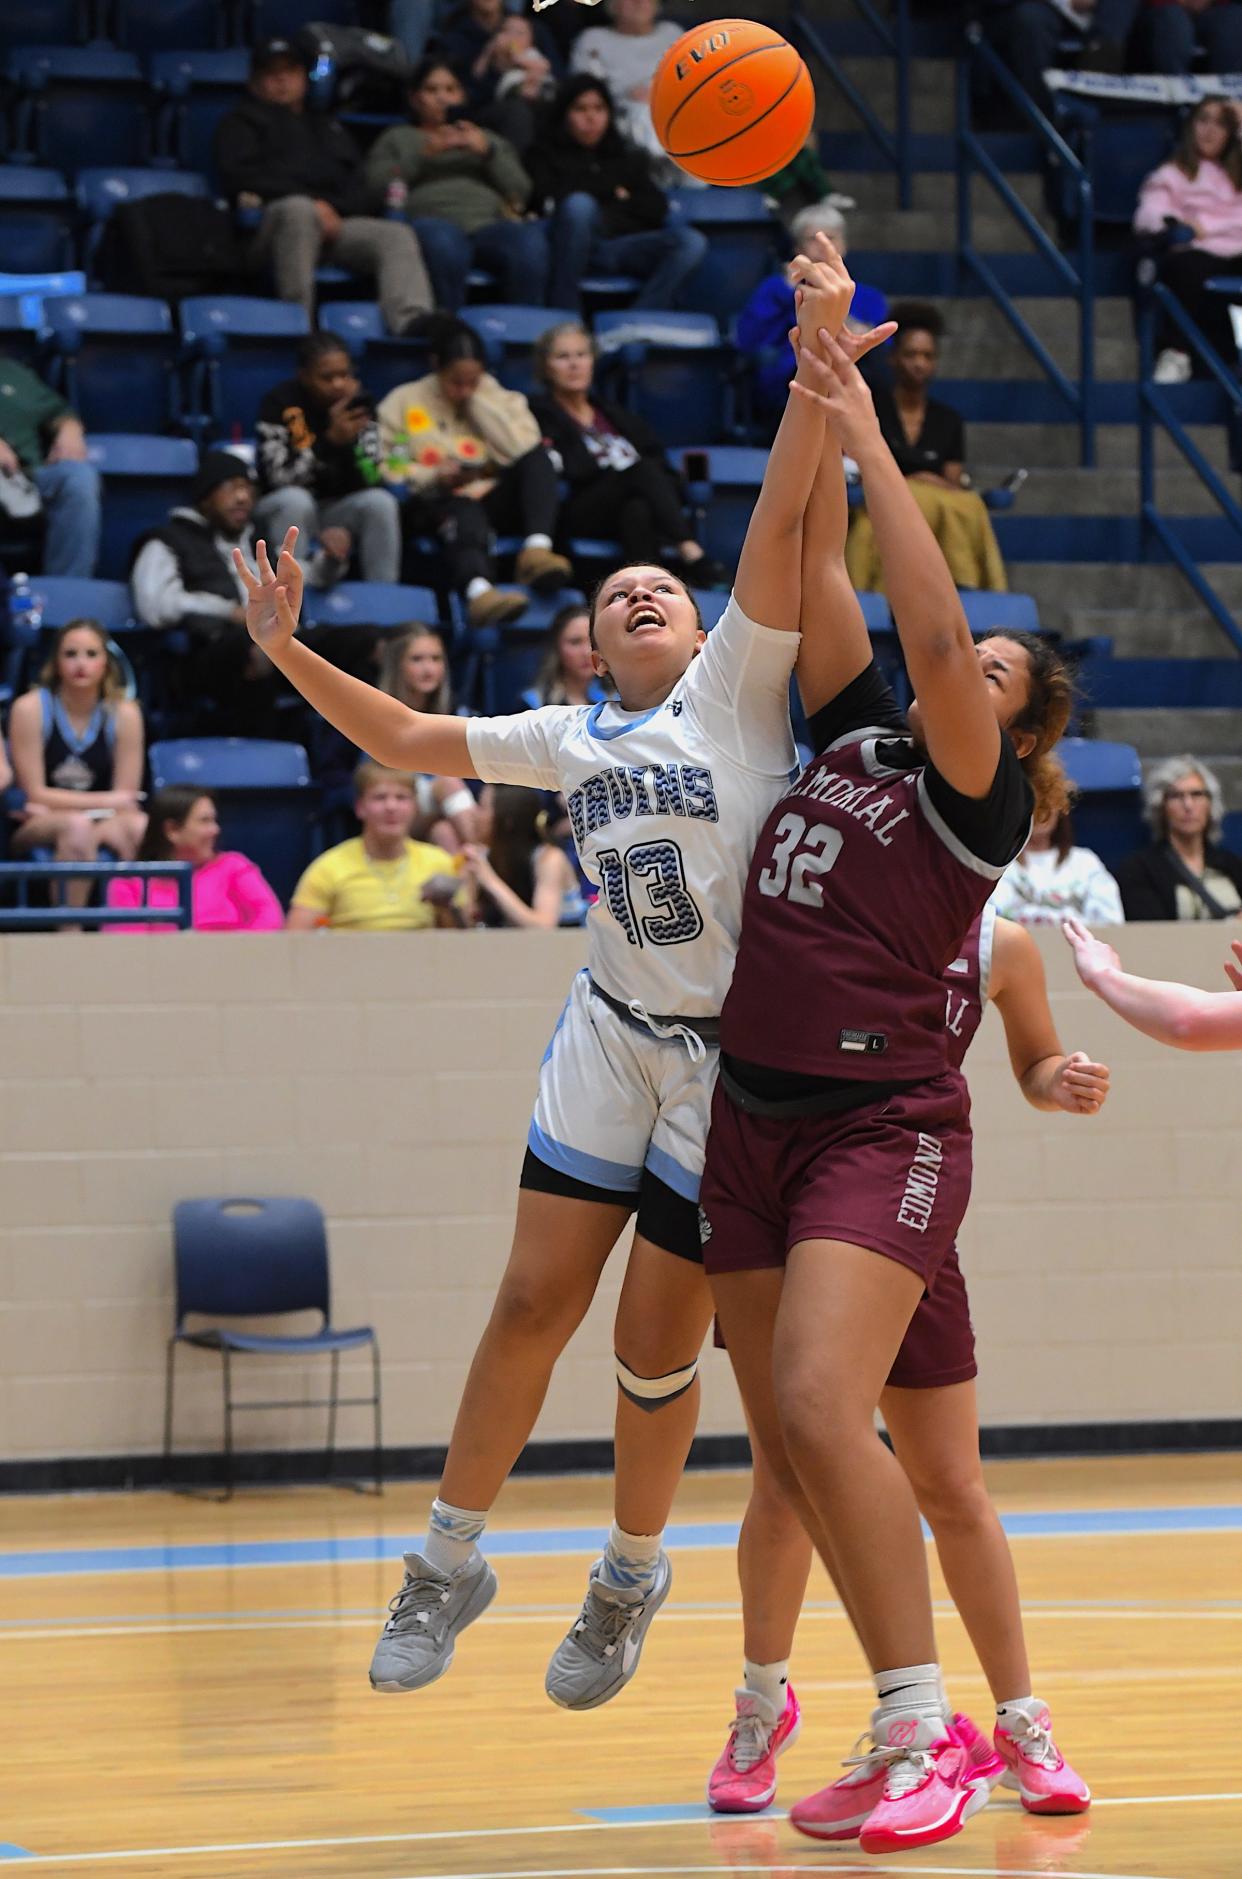 Bartlesville High School's Mikka Chambers (13) goes up for a rebound during basketball action earlier in the season.